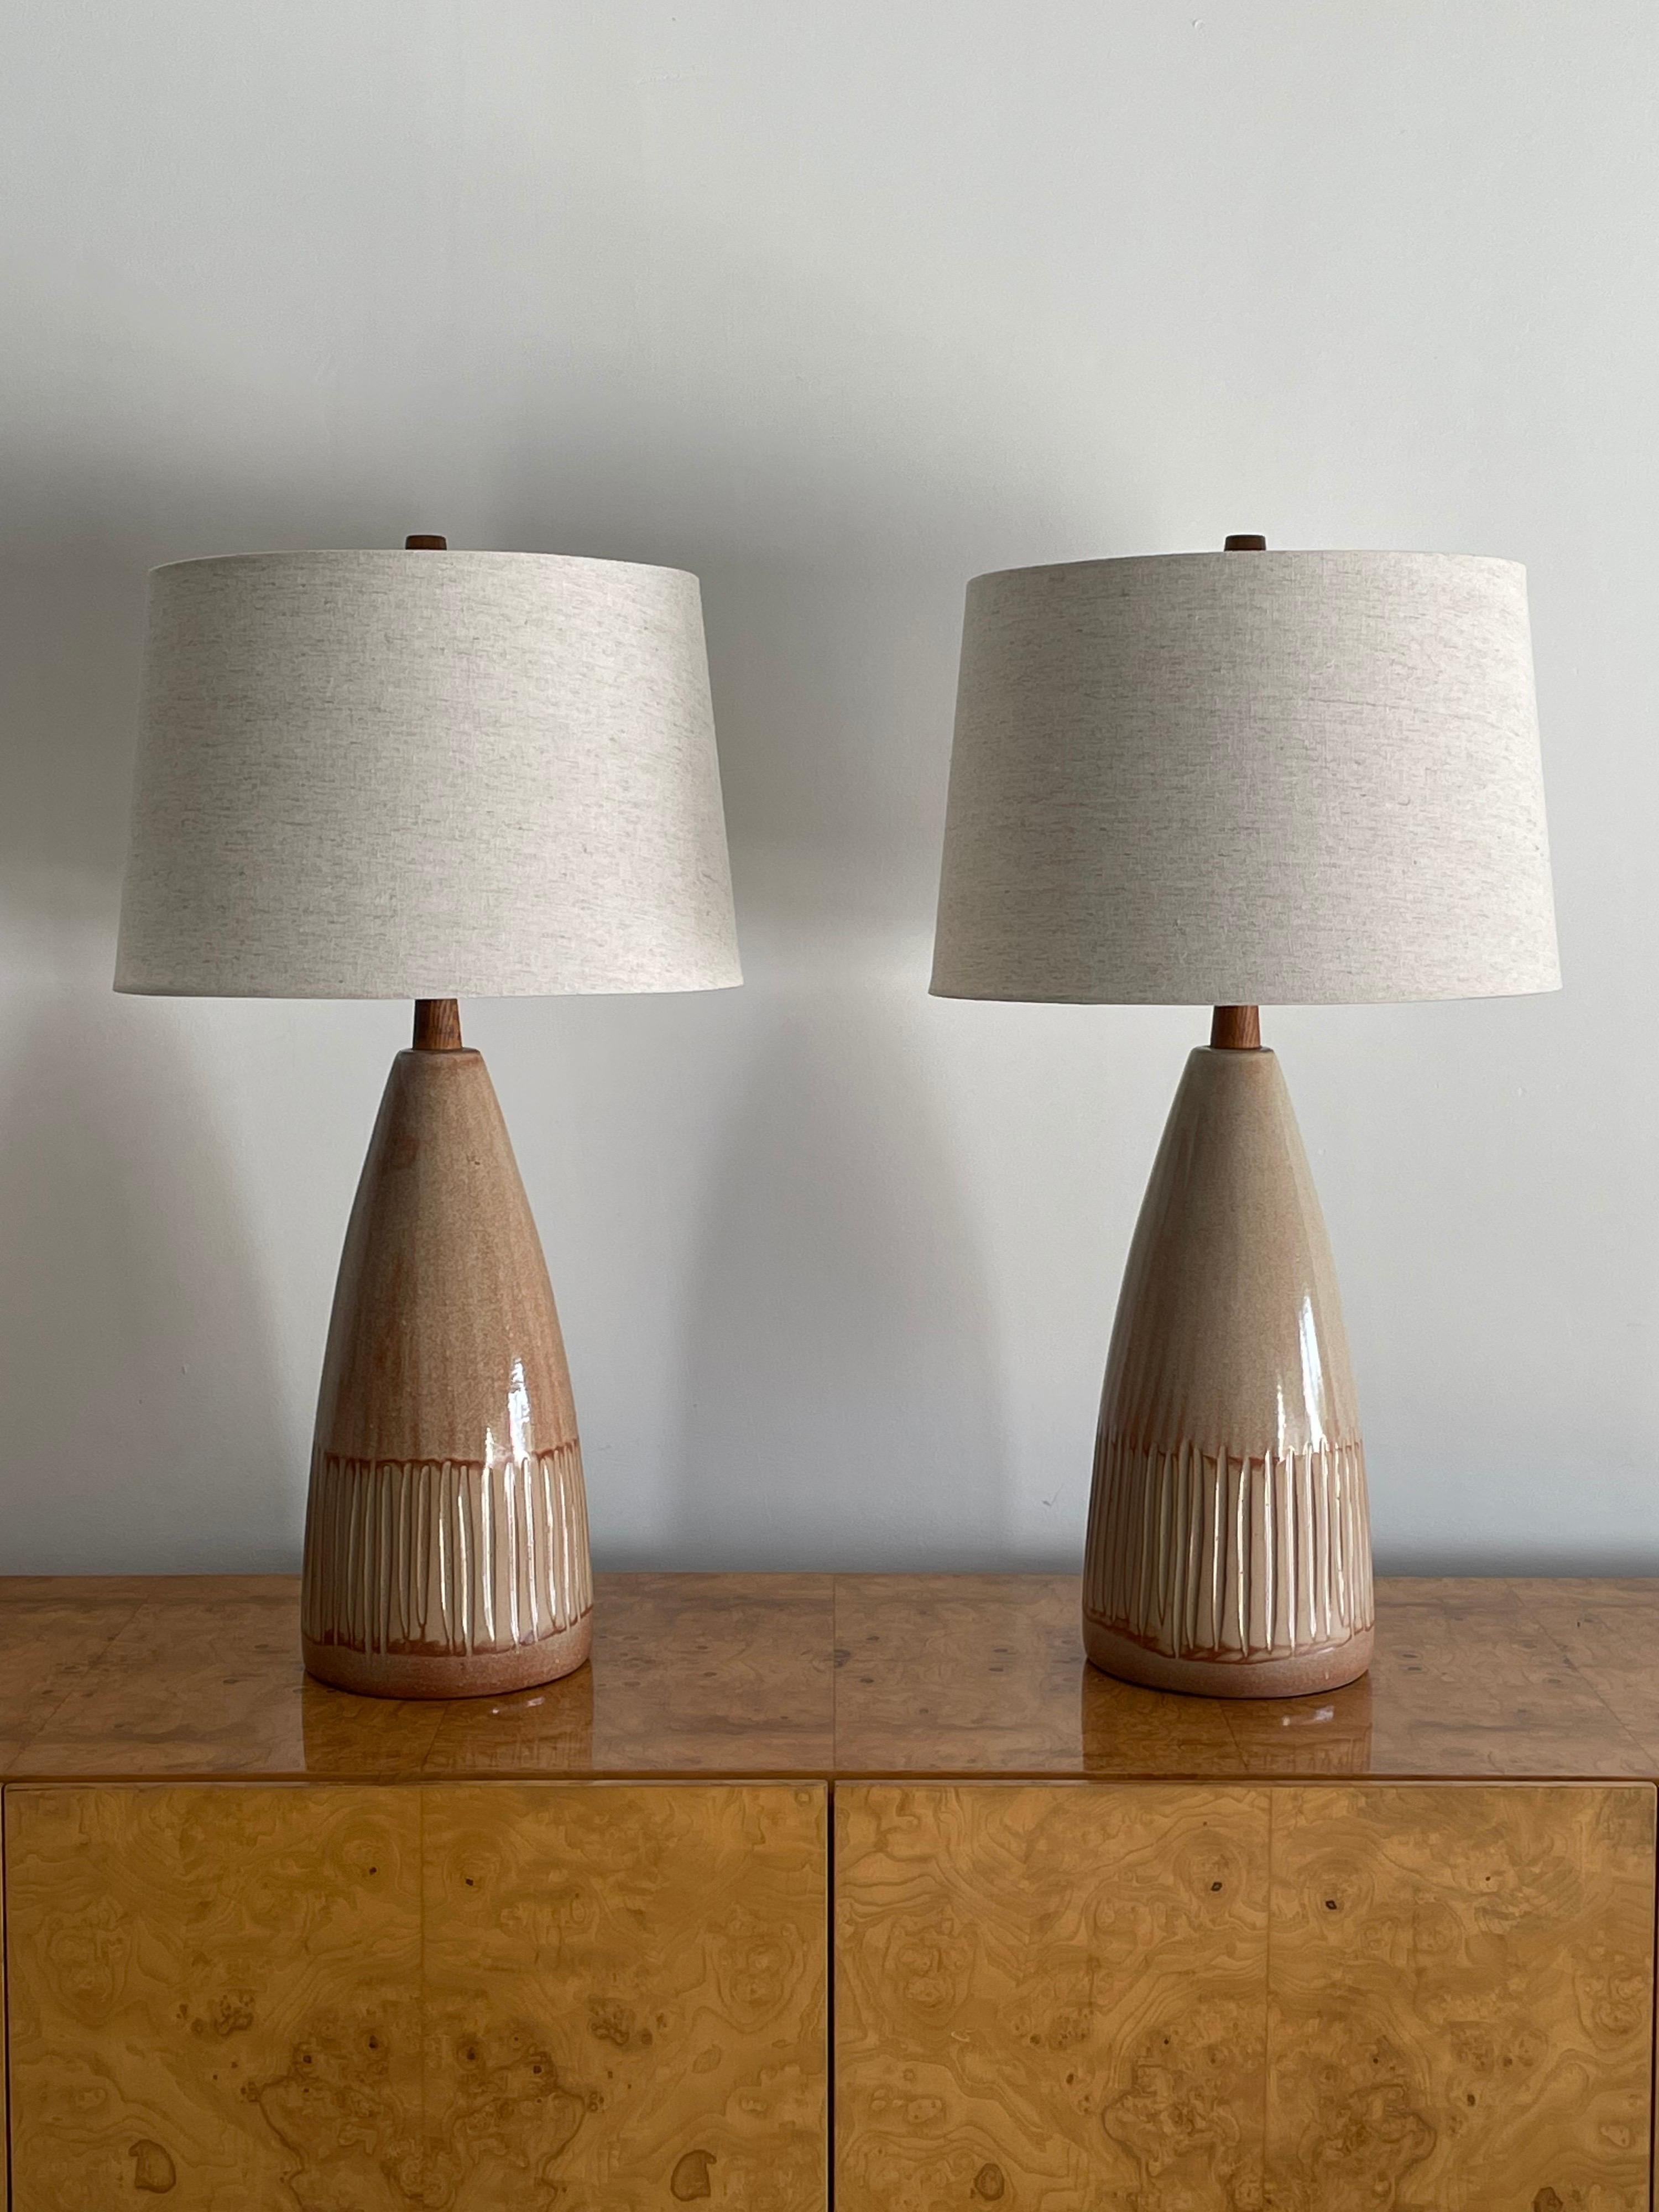 A large pair of table lamps designed by famed ceramicist duo Jane and Gordon Martz for Marshall Studios. Features a rose/ blush color over a sand base. 

Measures: Overall 
28” tall
15” wide

Ceramic 
15.25” tall
7” wide.